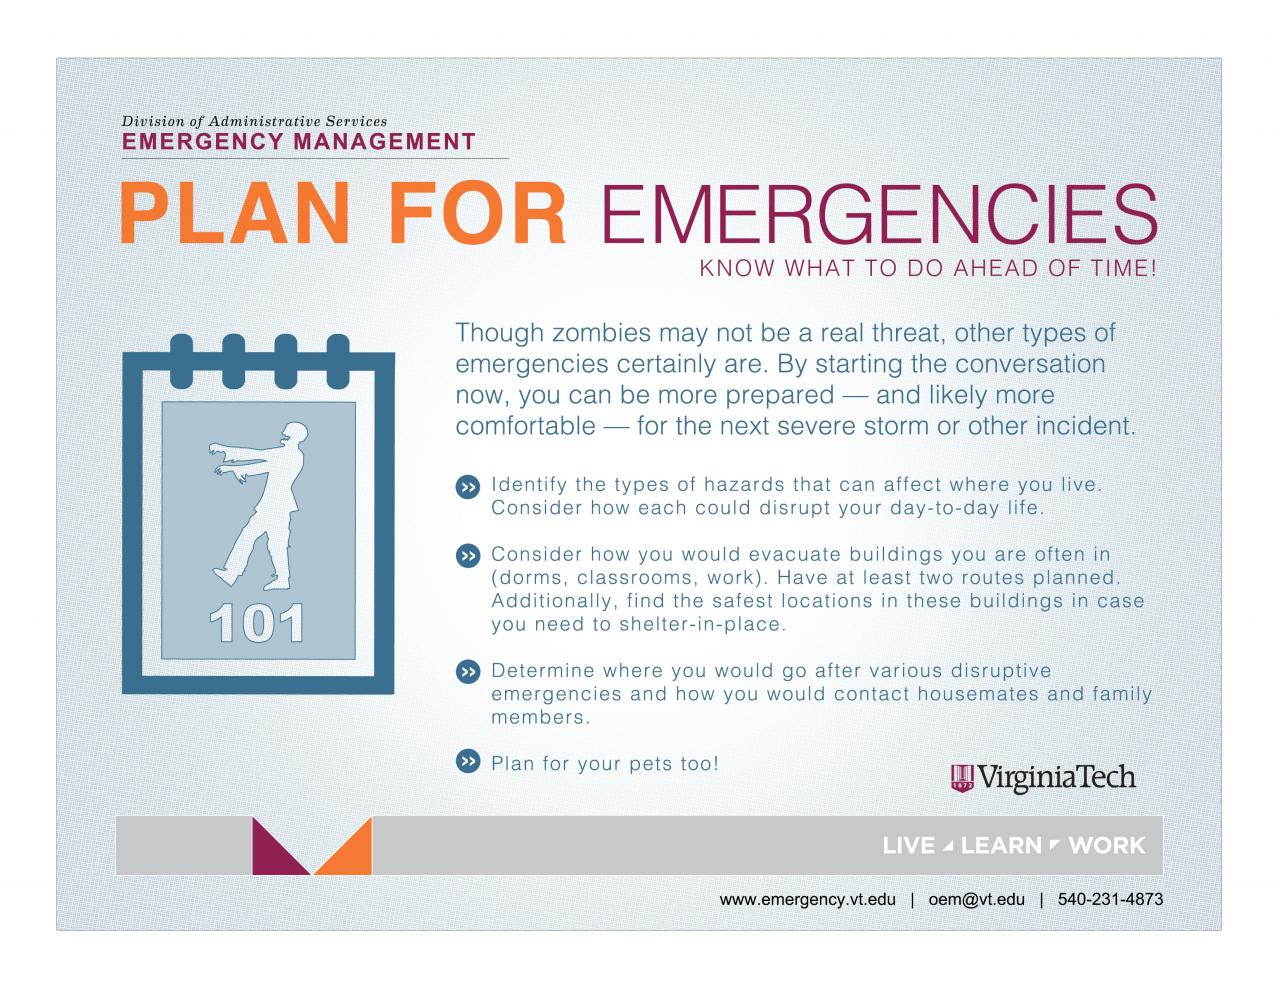 An emergency management plan does not include